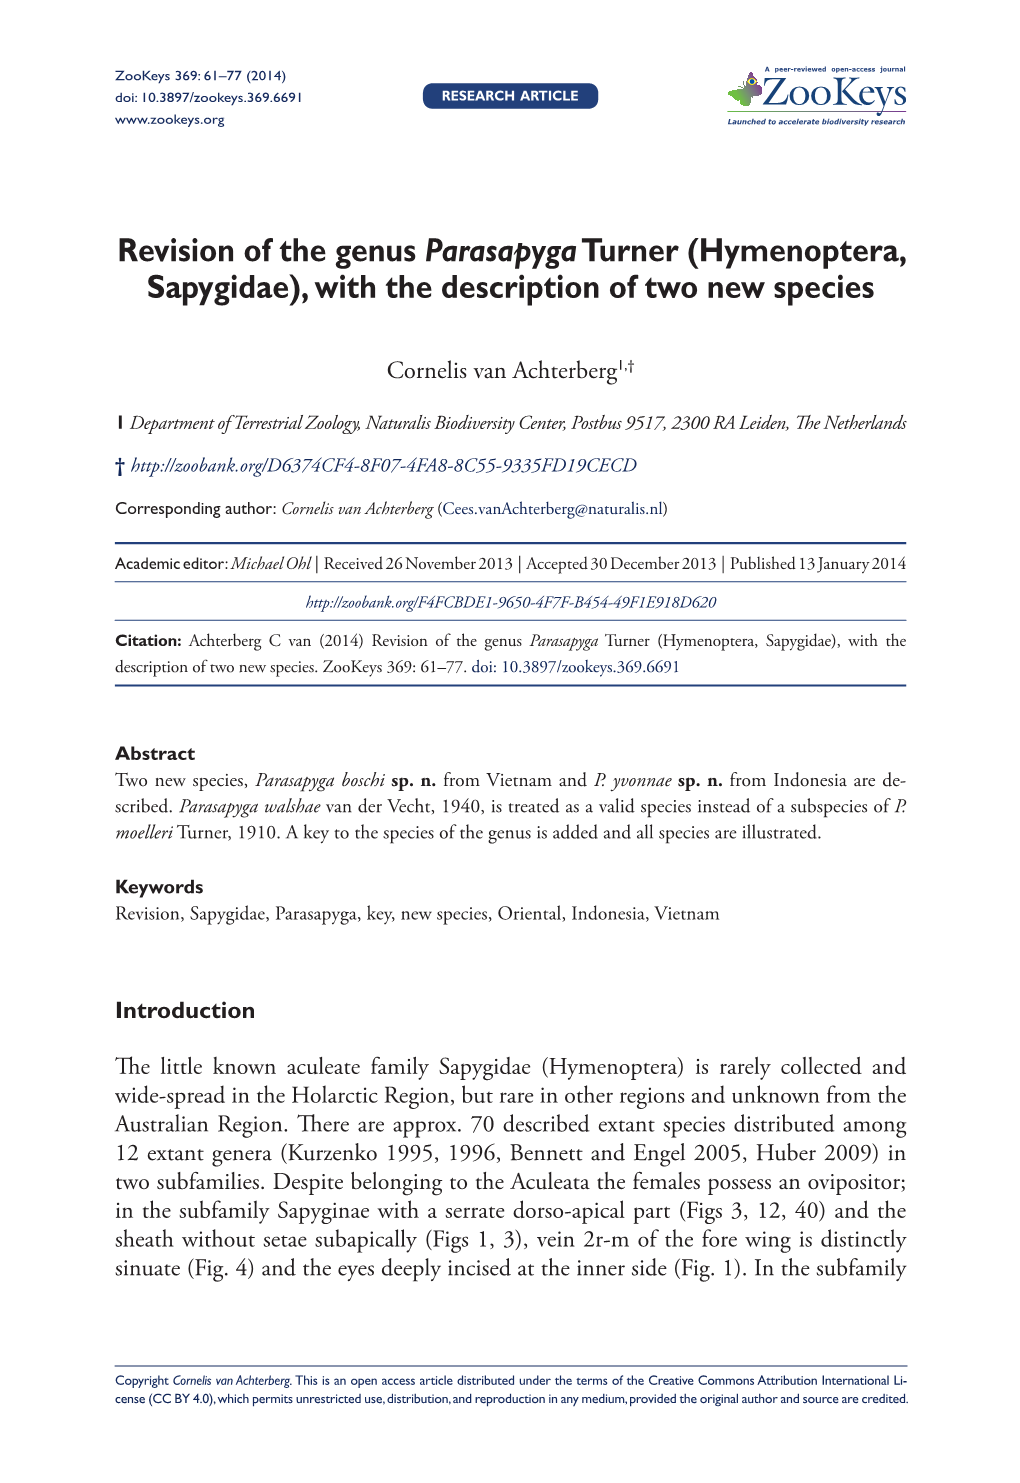 Hymenoptera, Sapygidae), with the Description of Two New Species